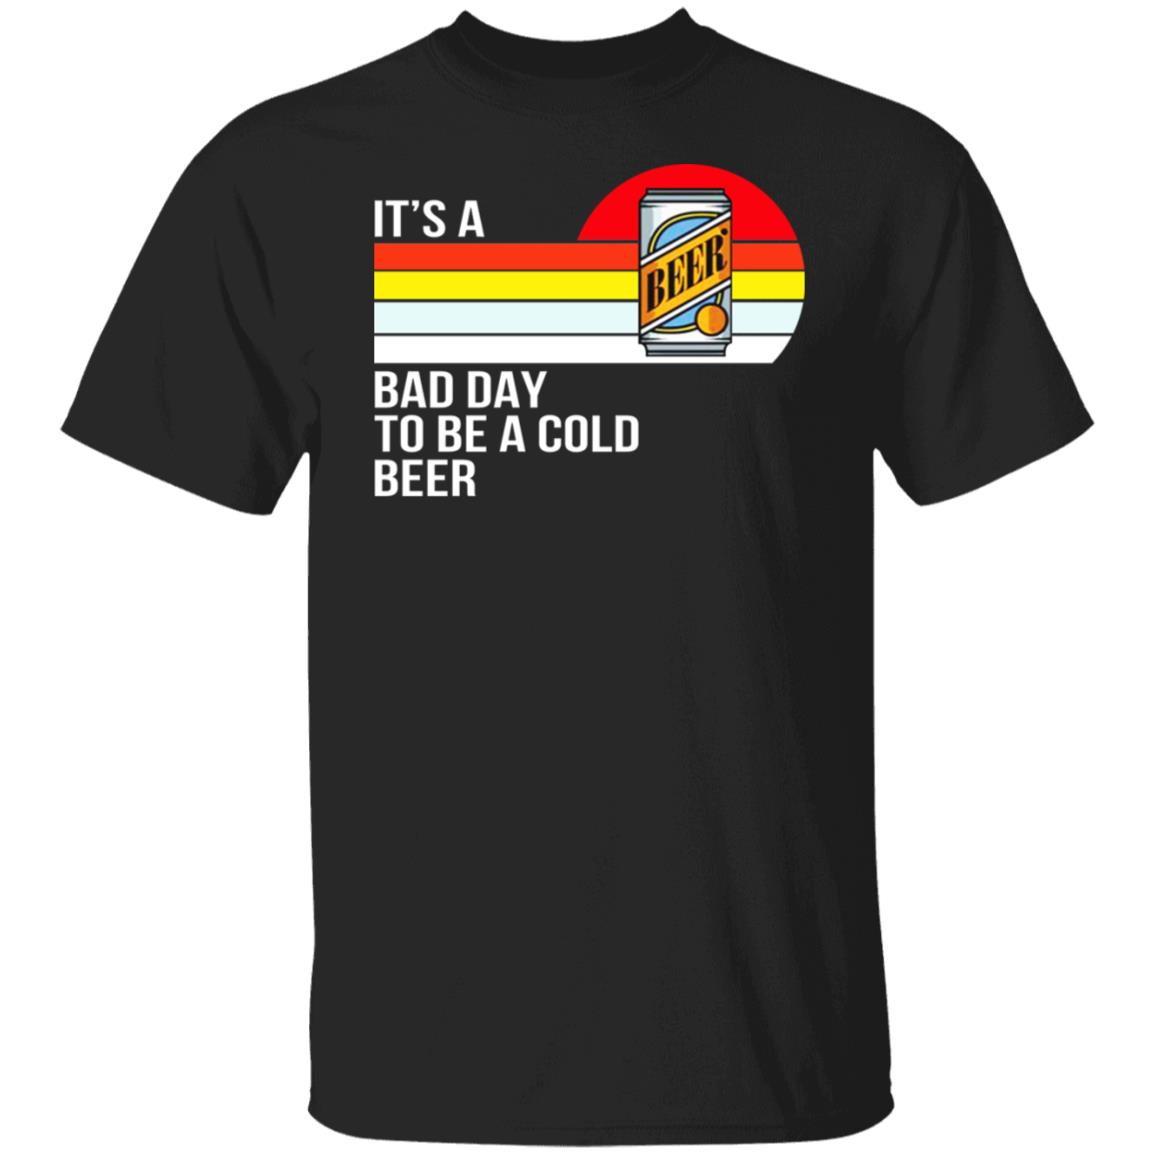 It's A Bad Day To Be A Cold Beer Shirt